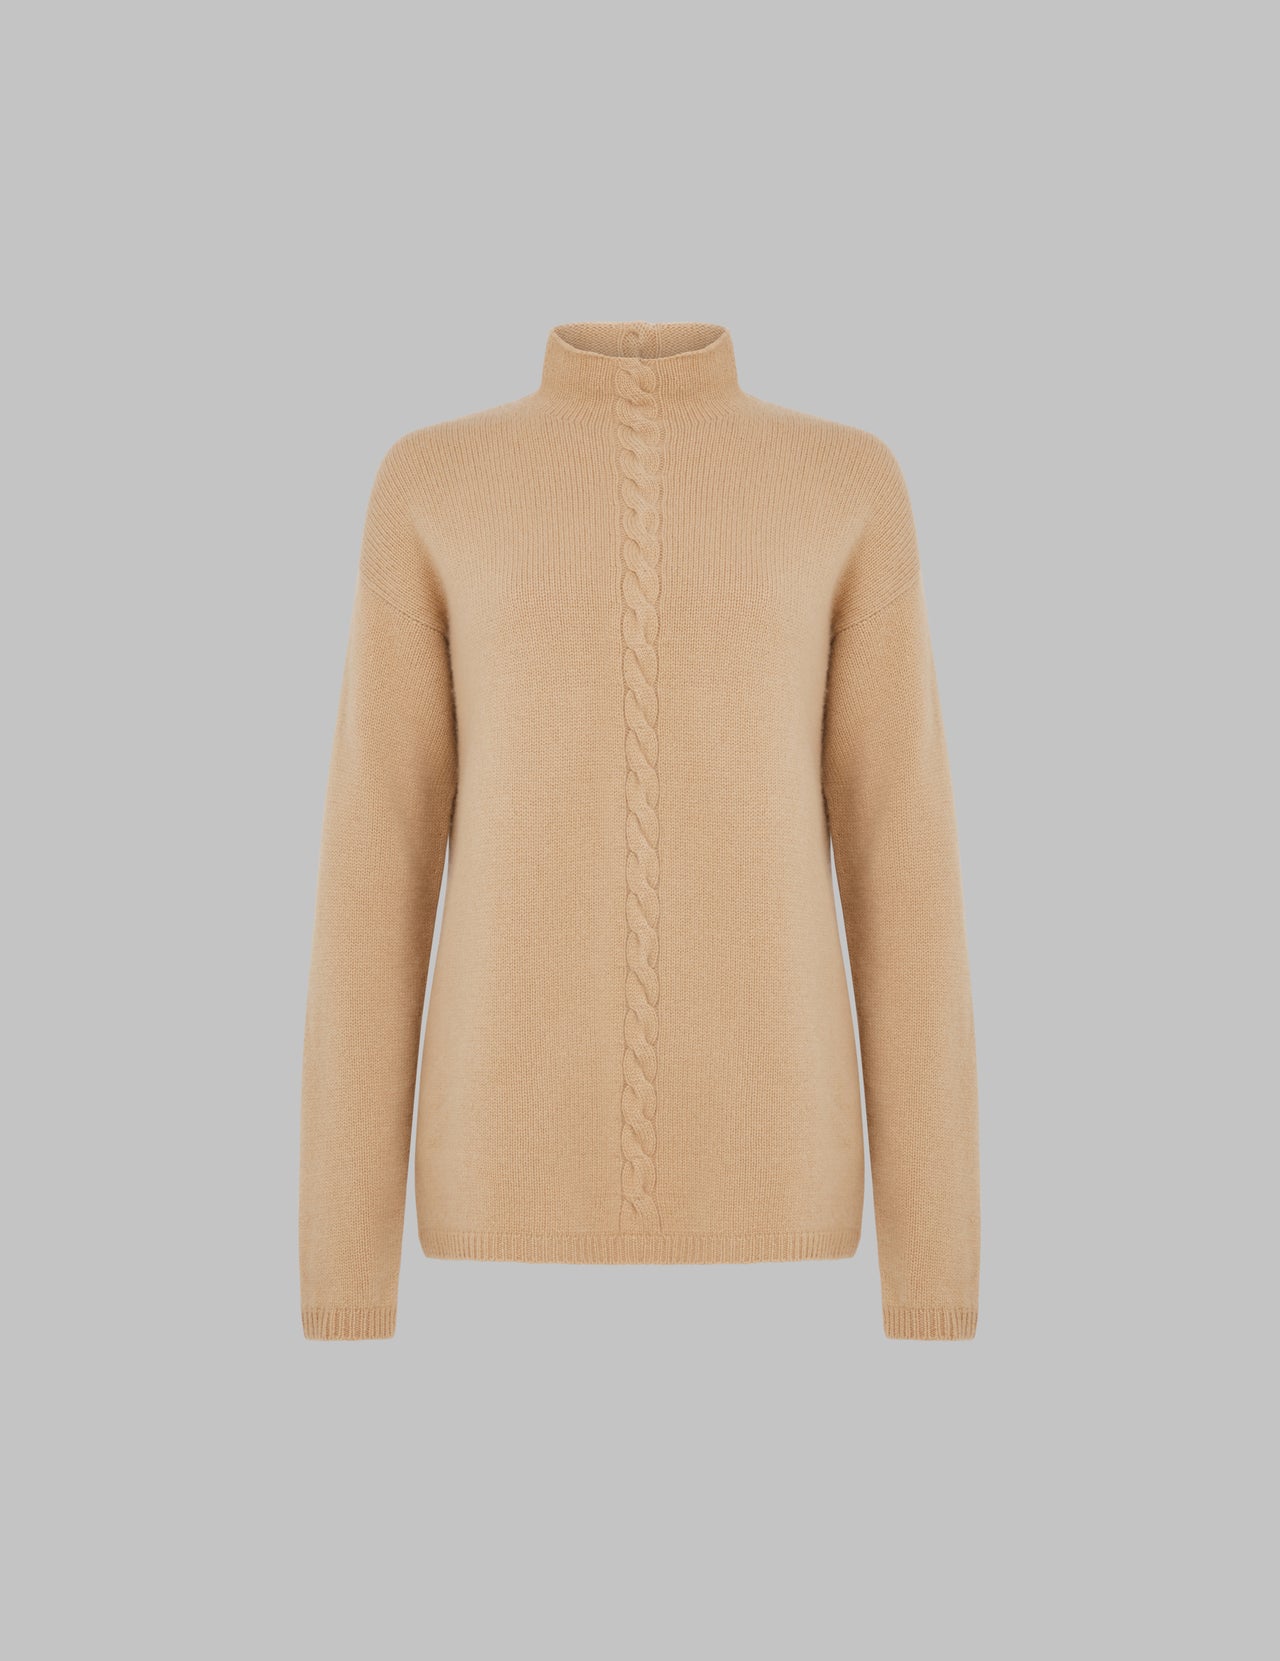  Honey Cashmere Sweater with Cable Details | Varana 